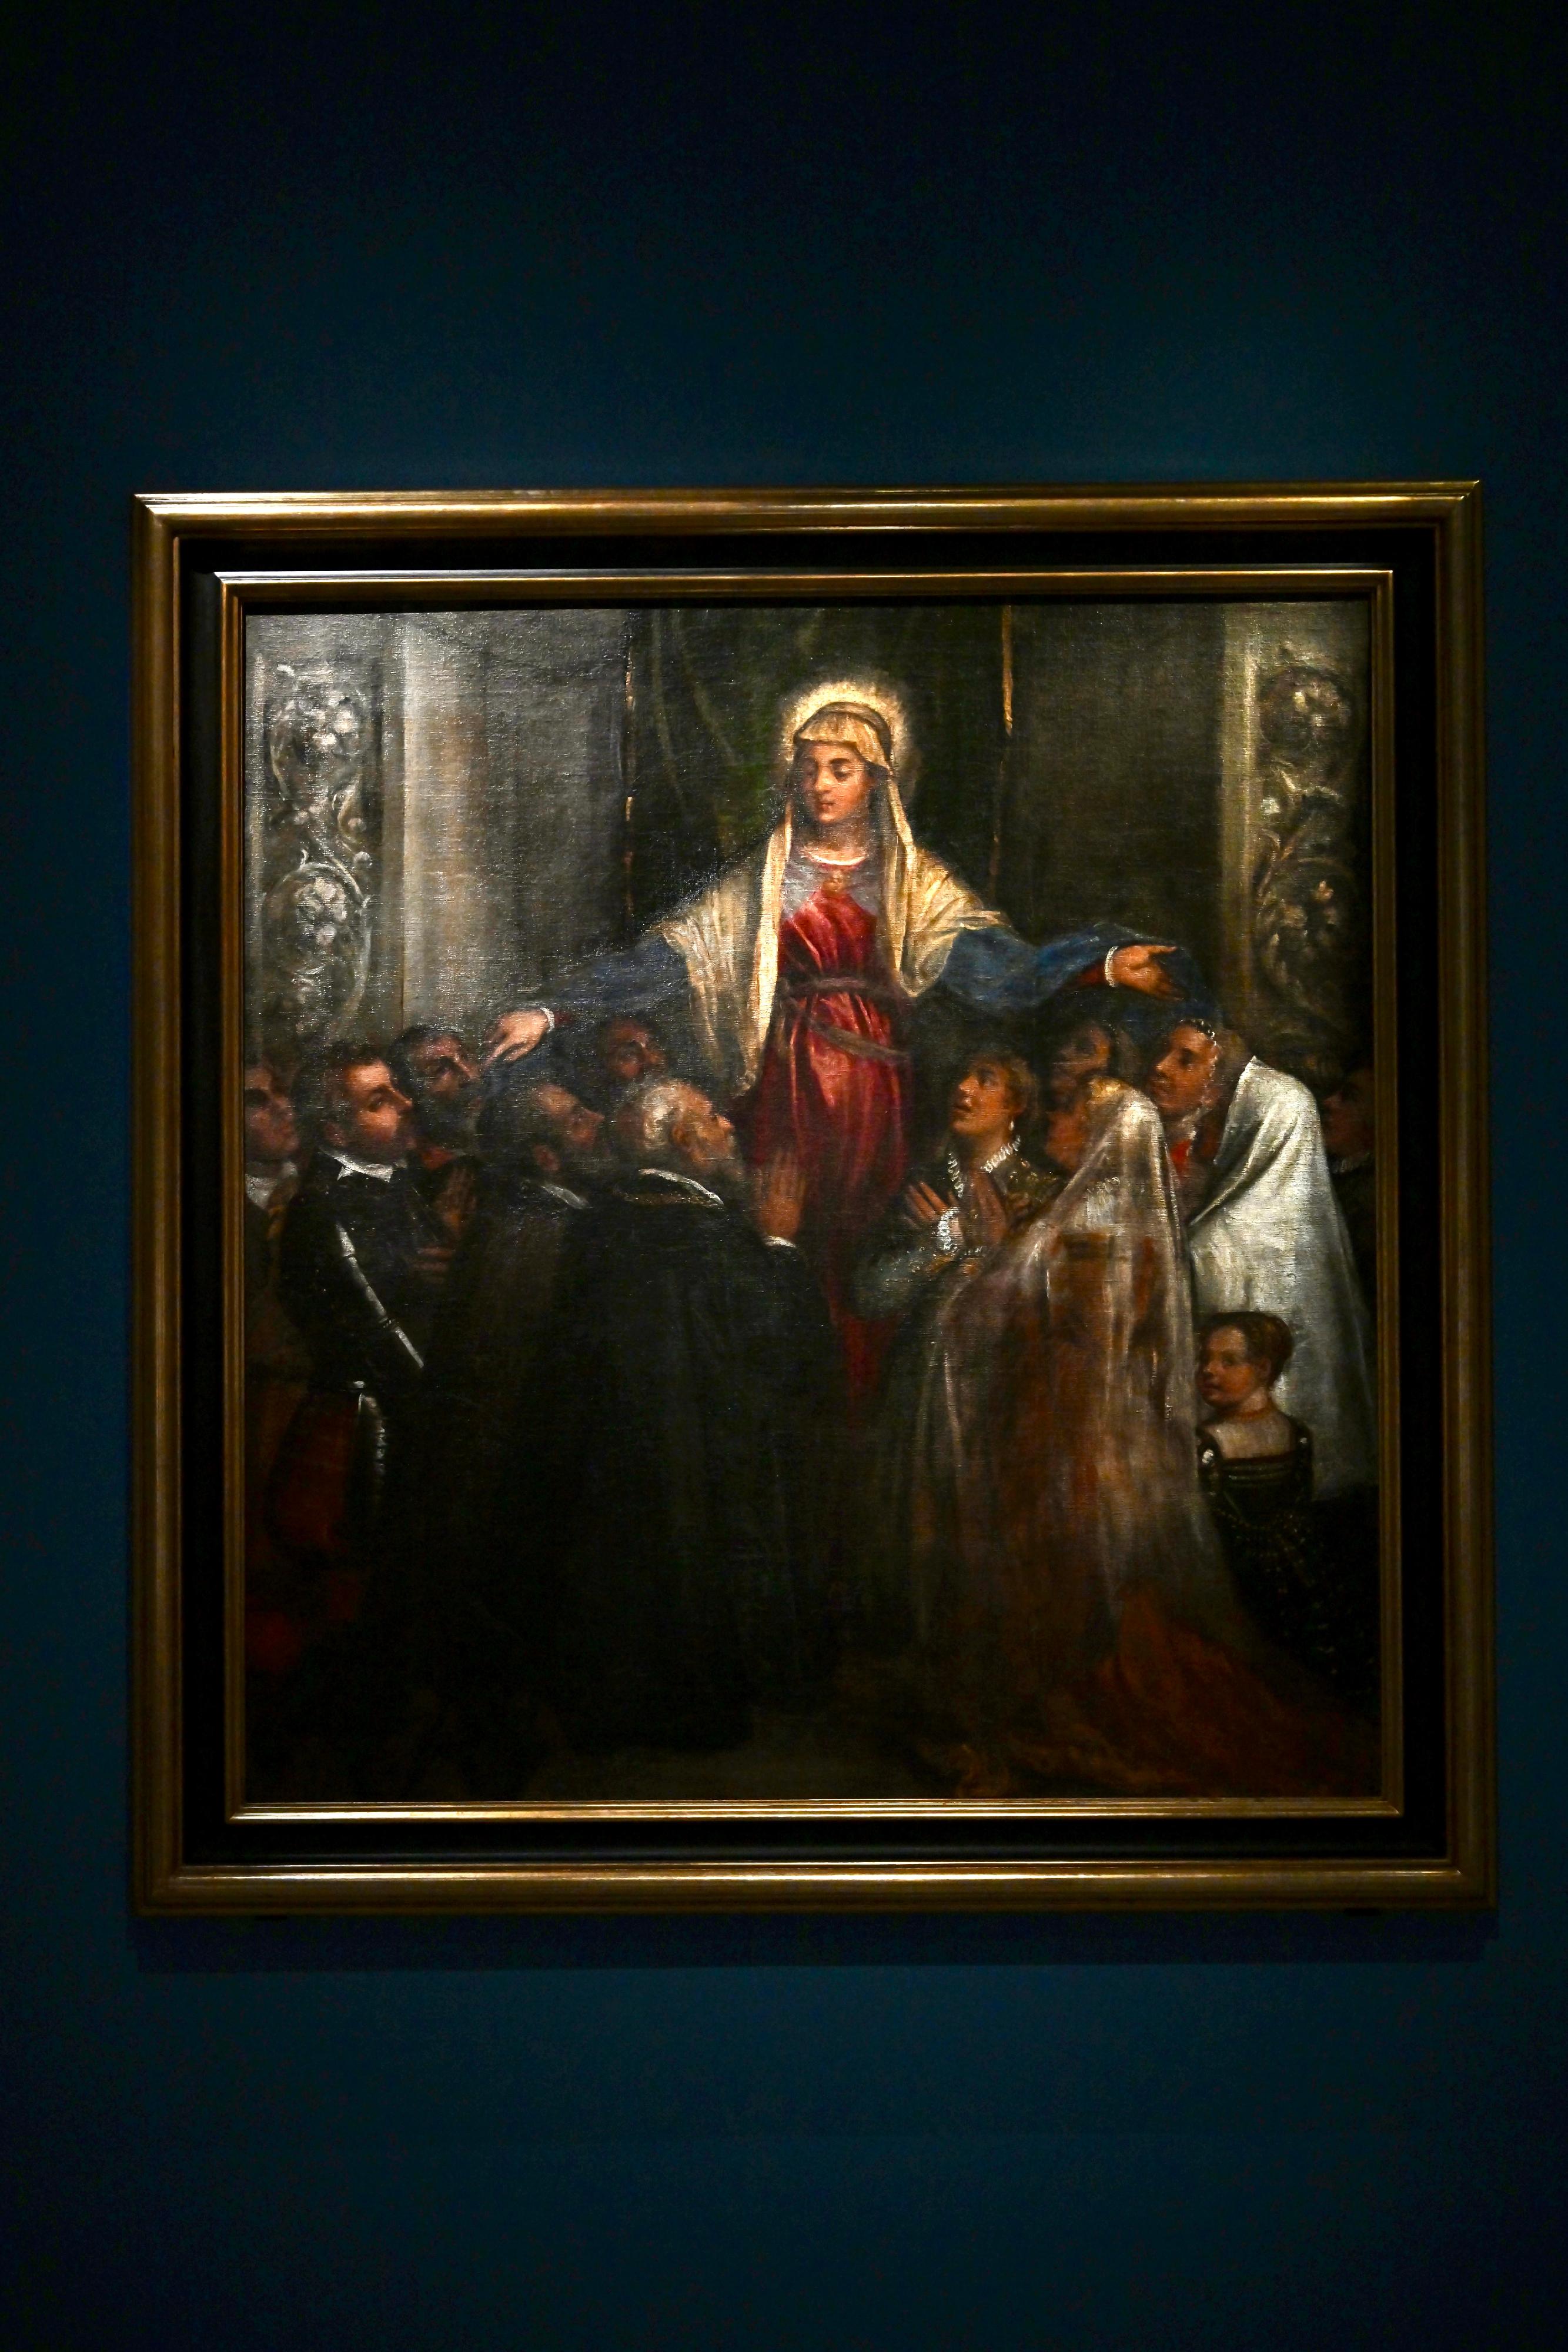 "The Hong Kong Jockey Club Series: Titian and the Venetian Renaissance from the Uffizi" exhibition opens to the public at the Hong Kong Museum of Art from today (November 3). Picture shows Titian's work "Madonna of Mercy".